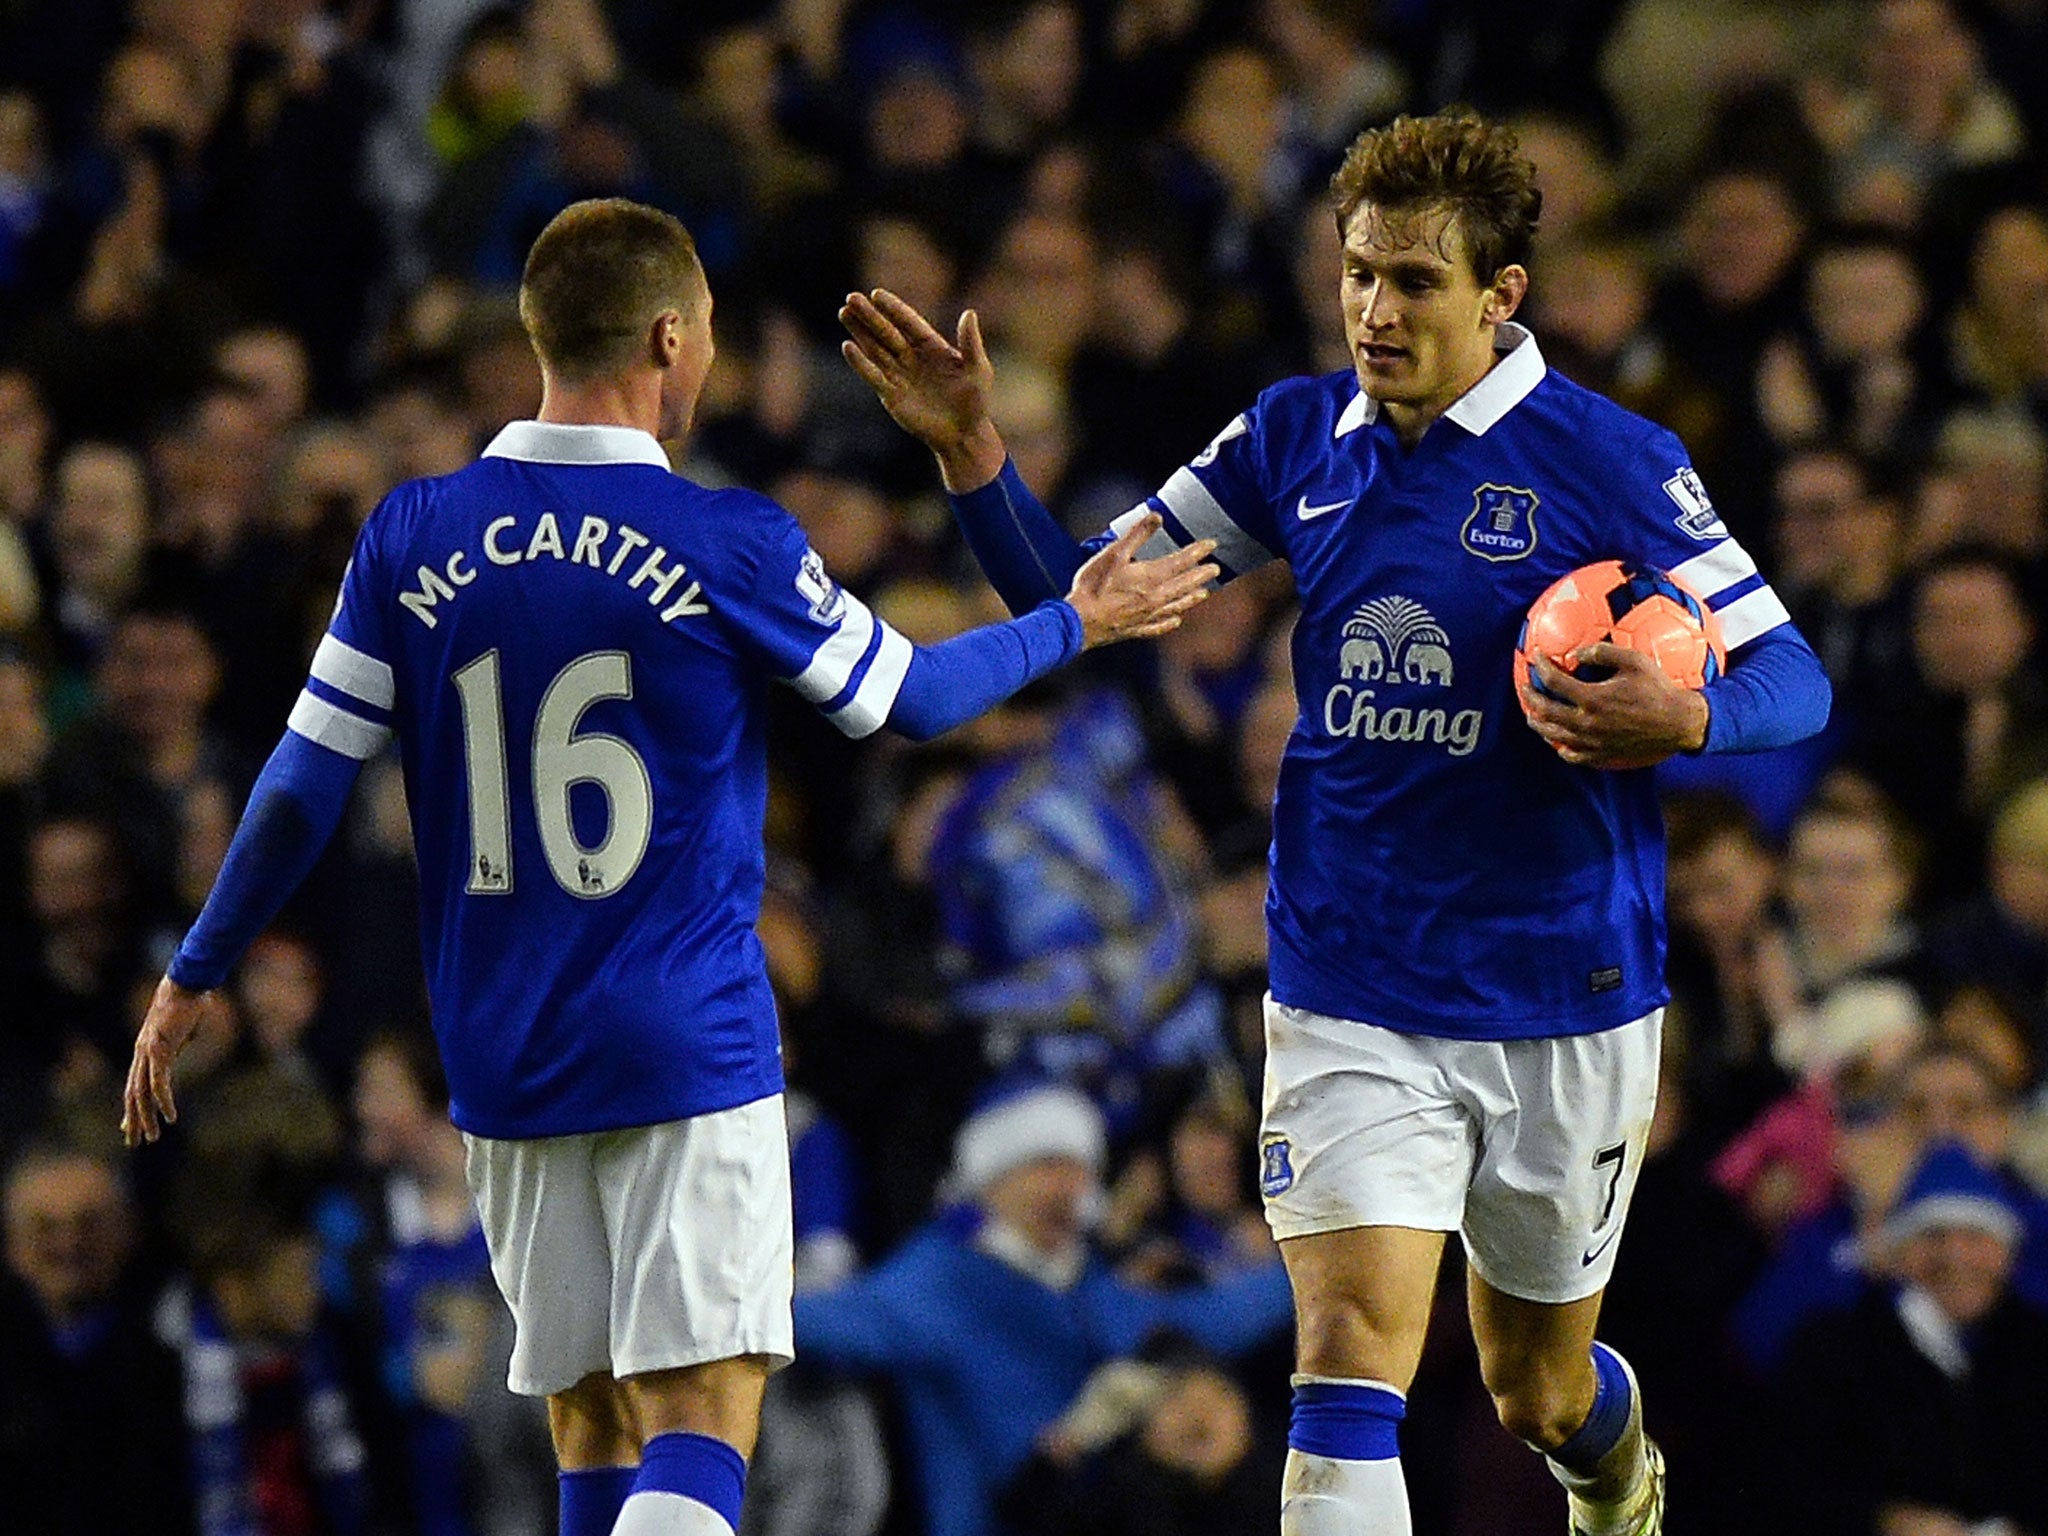 Everton striker Nikica Jelavic celebrates with James McCarthy after scoring in the 4-0 FA Cup win over QPR